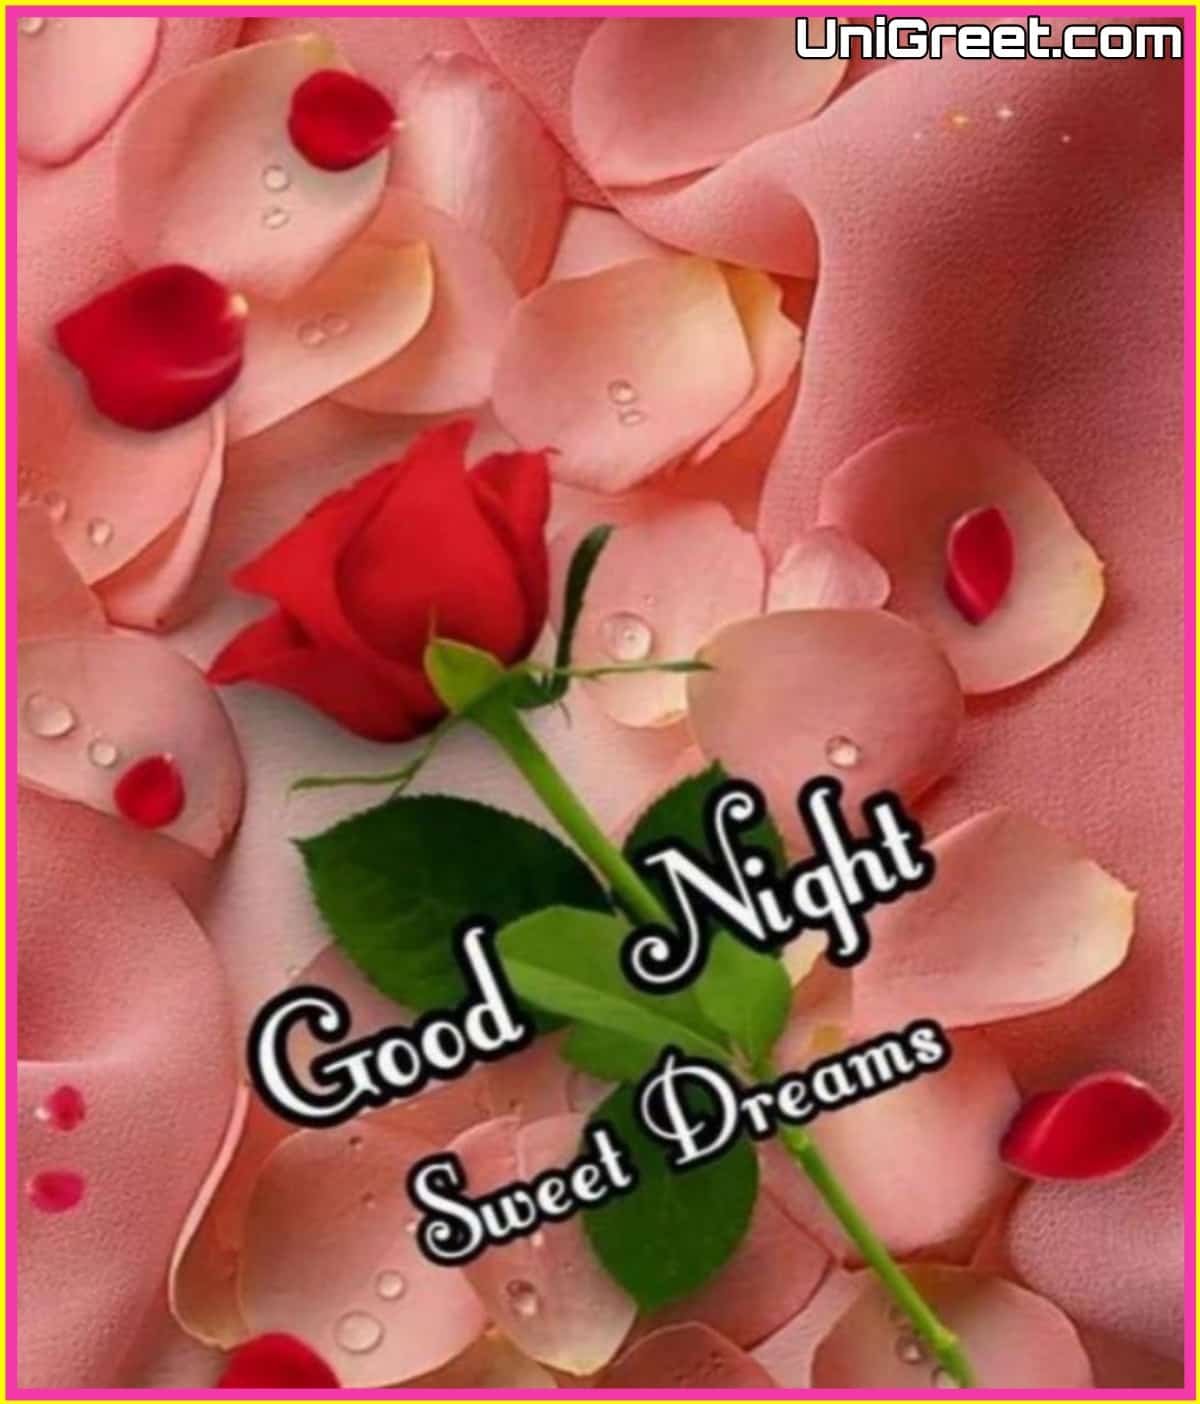 Good night image with sweet dreams to wish good night pic